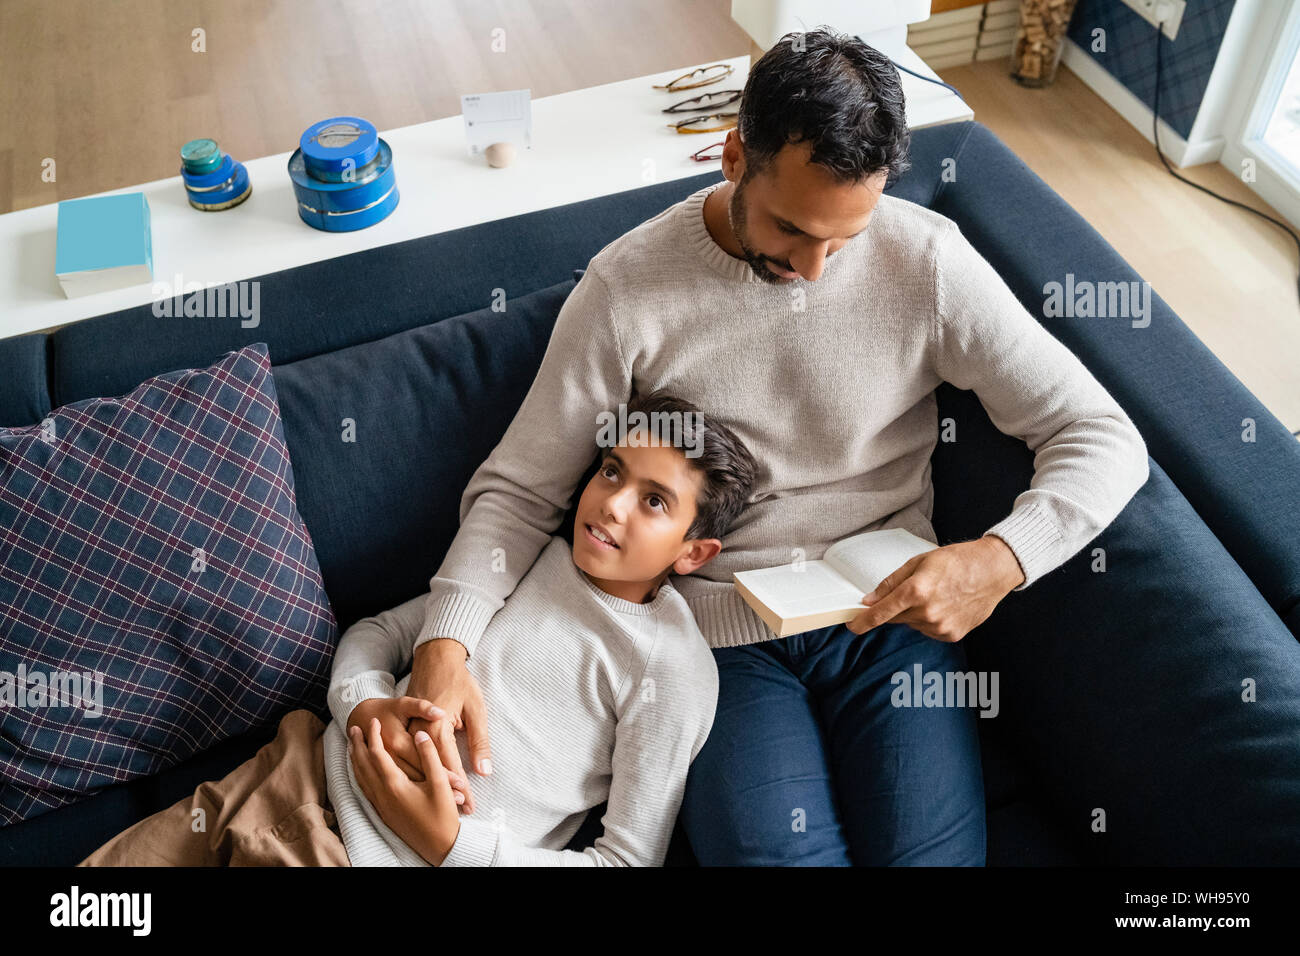 Father lying with son on couch in living room reading book Stock Photo